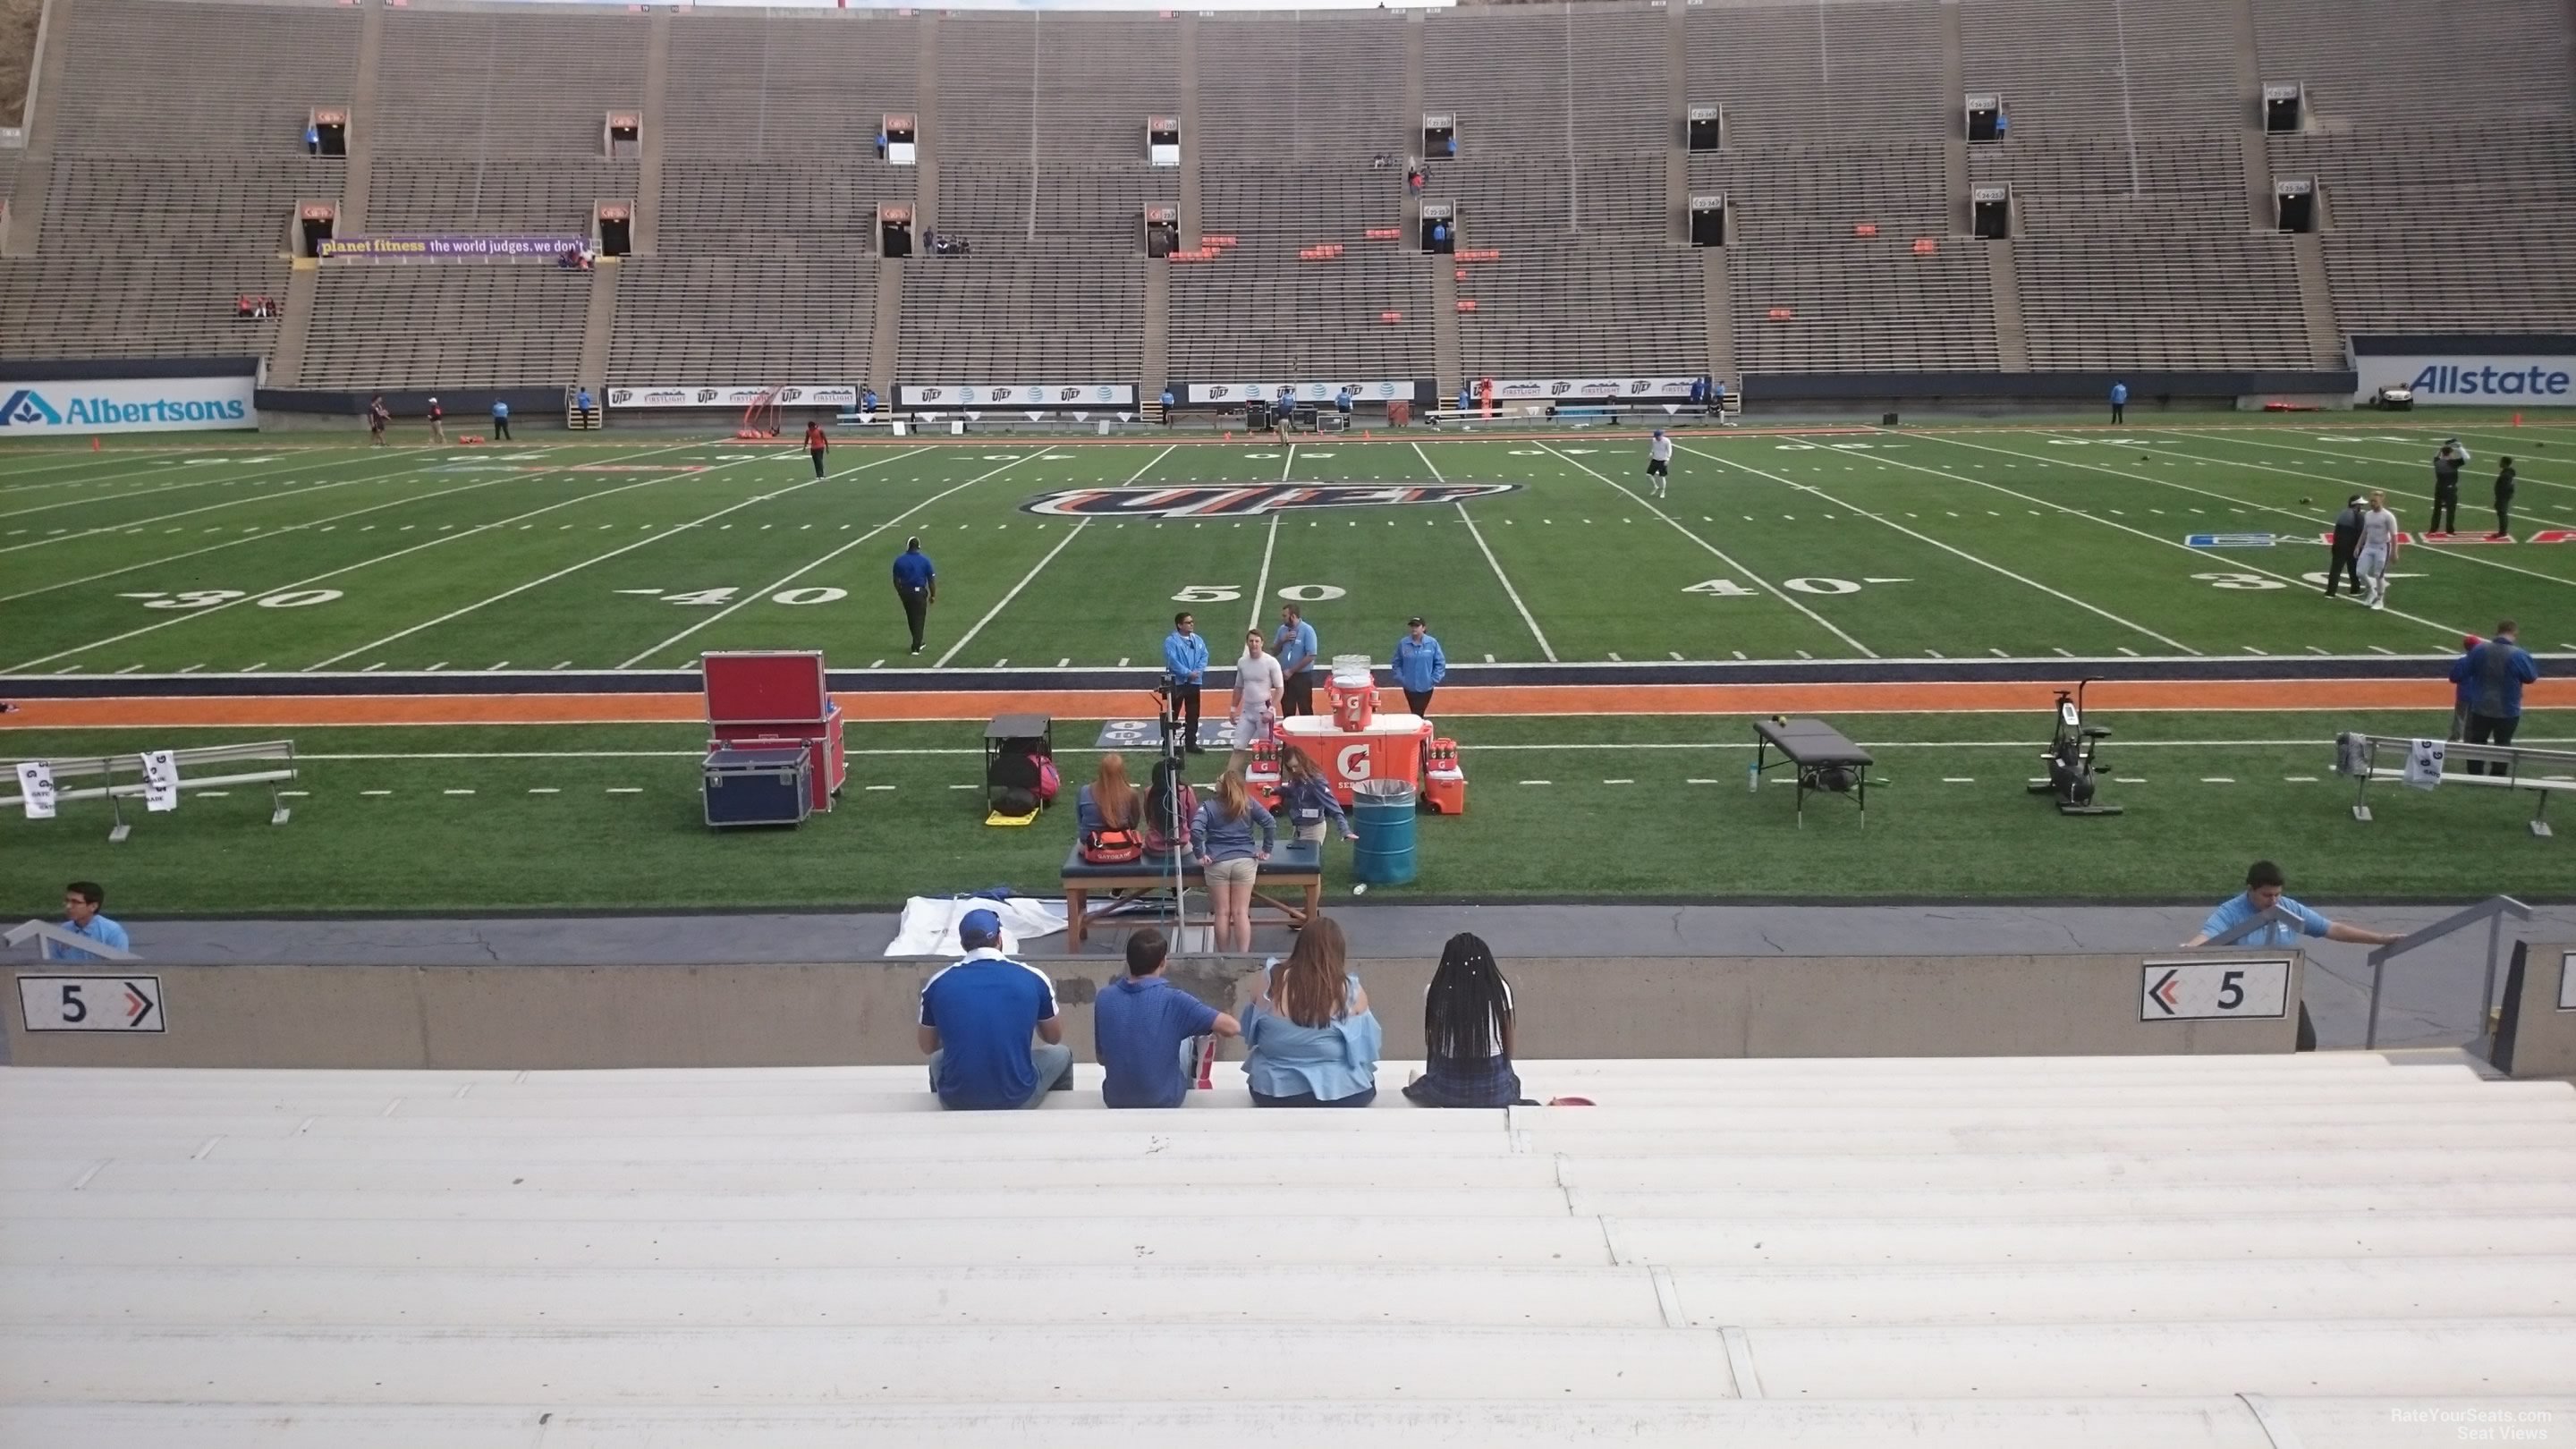 section 5, row 15 seat view  for football - sun bowl